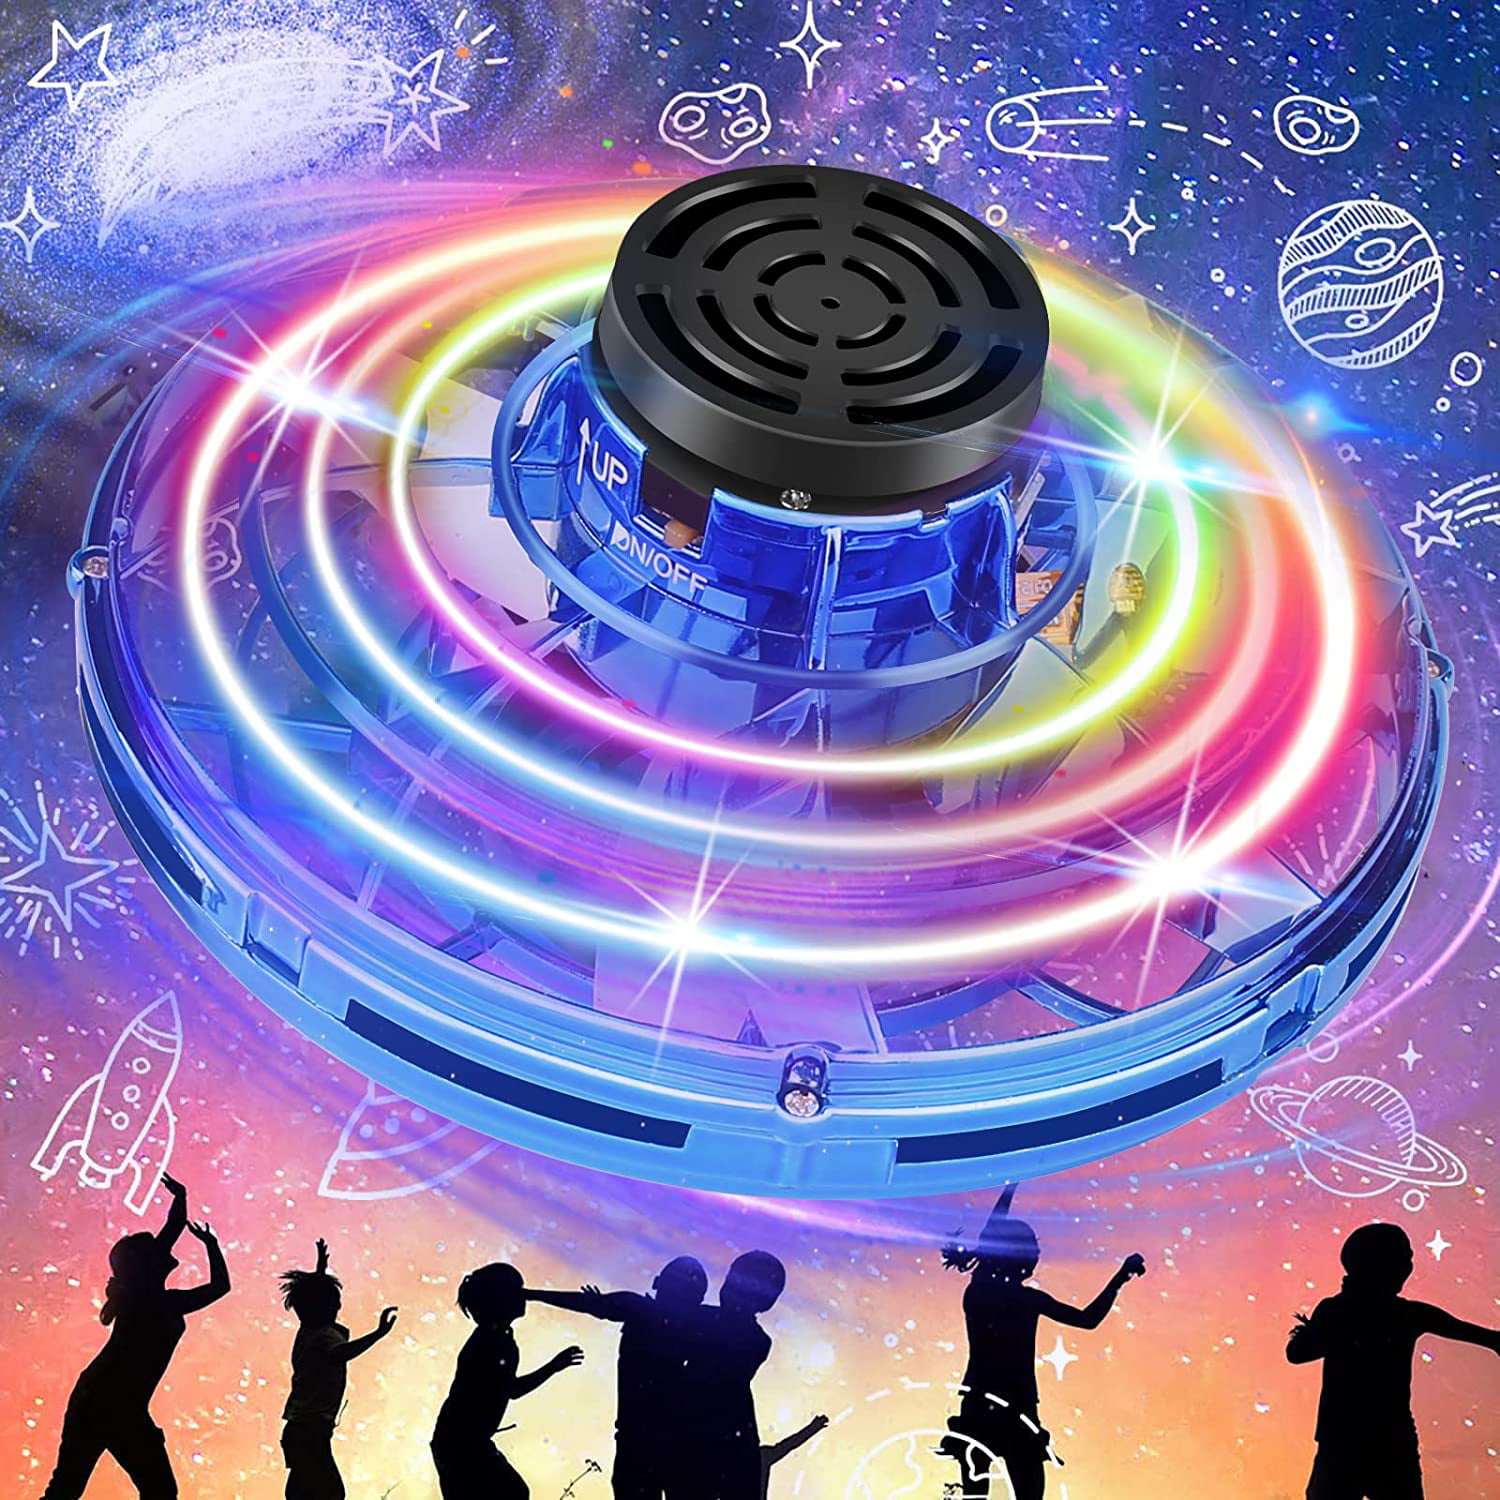 Flying Spinner Mini Drones for Kids Magic Flying LED Lights UFO Hand Operated Drones with 360° Rotating Helicopter for Boys Girls Adult Gift 2022 Hot Toys for Birthday Christmas Outdoor Indoor Blue 